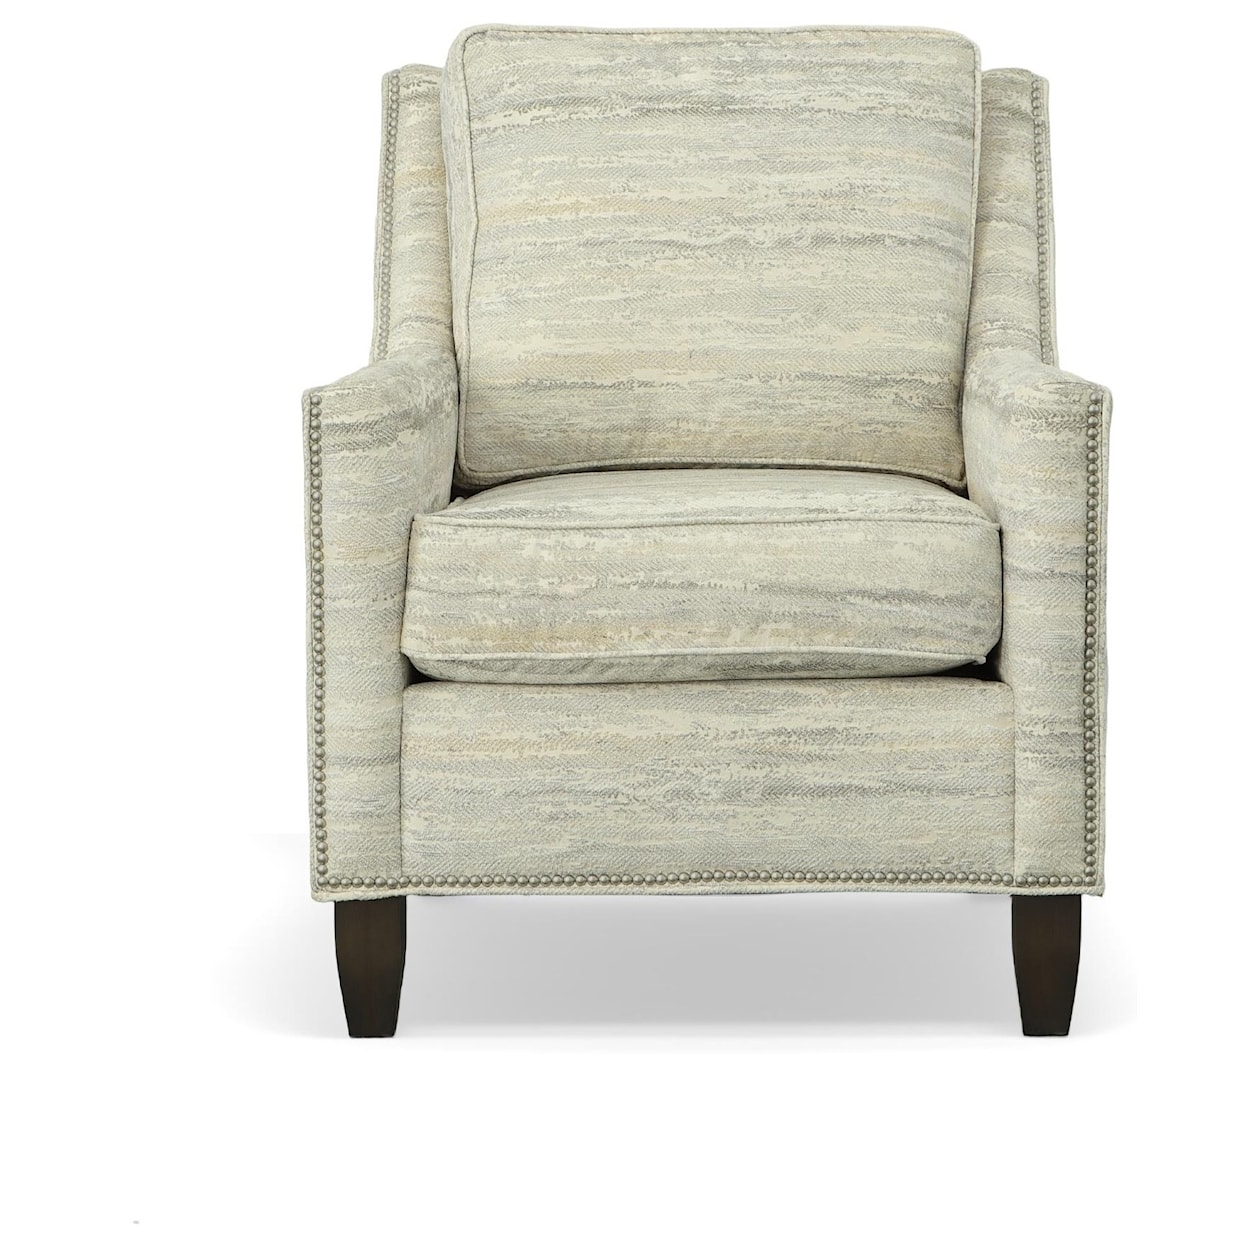 Craftmaster 090500 Accent Chair